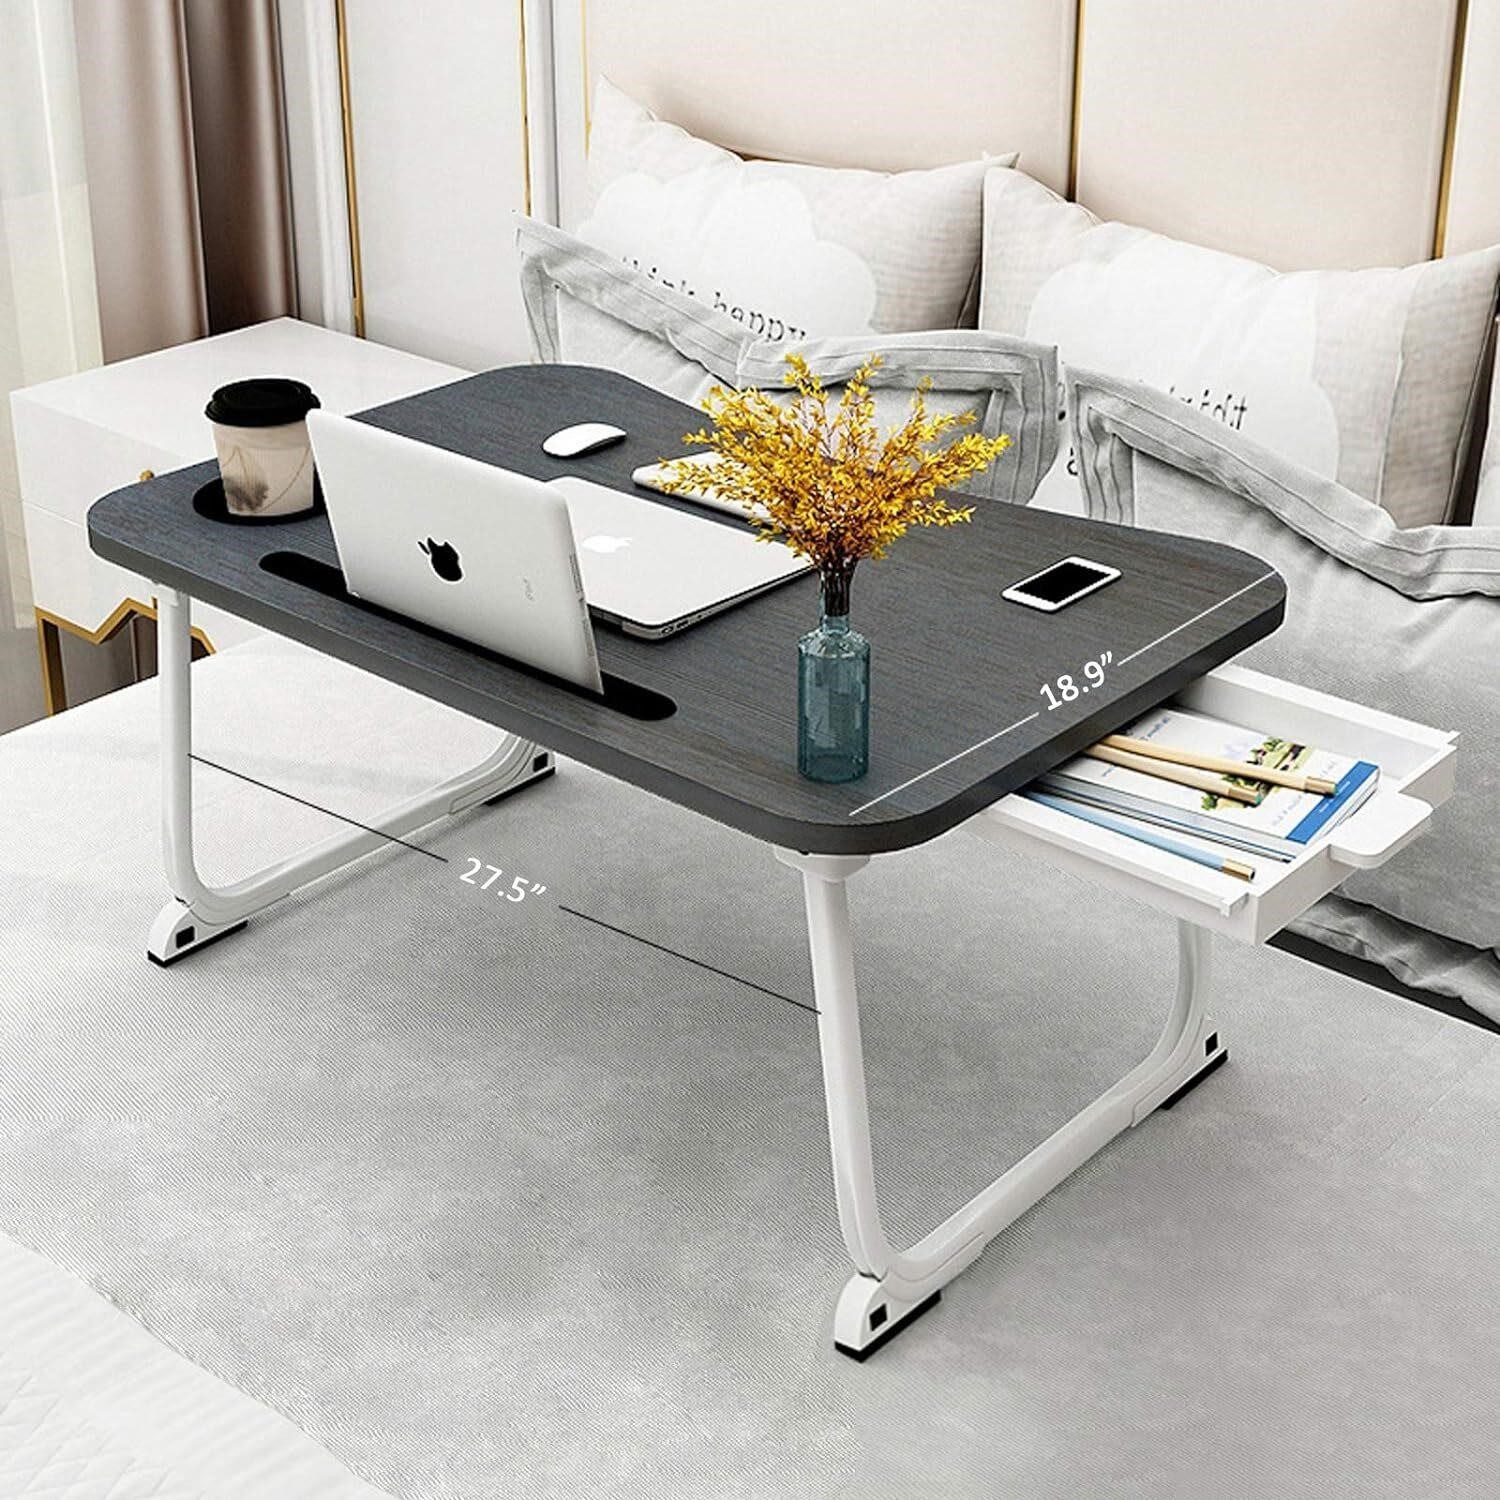 XXL Laptop Table Portable Lap Table with Beverage